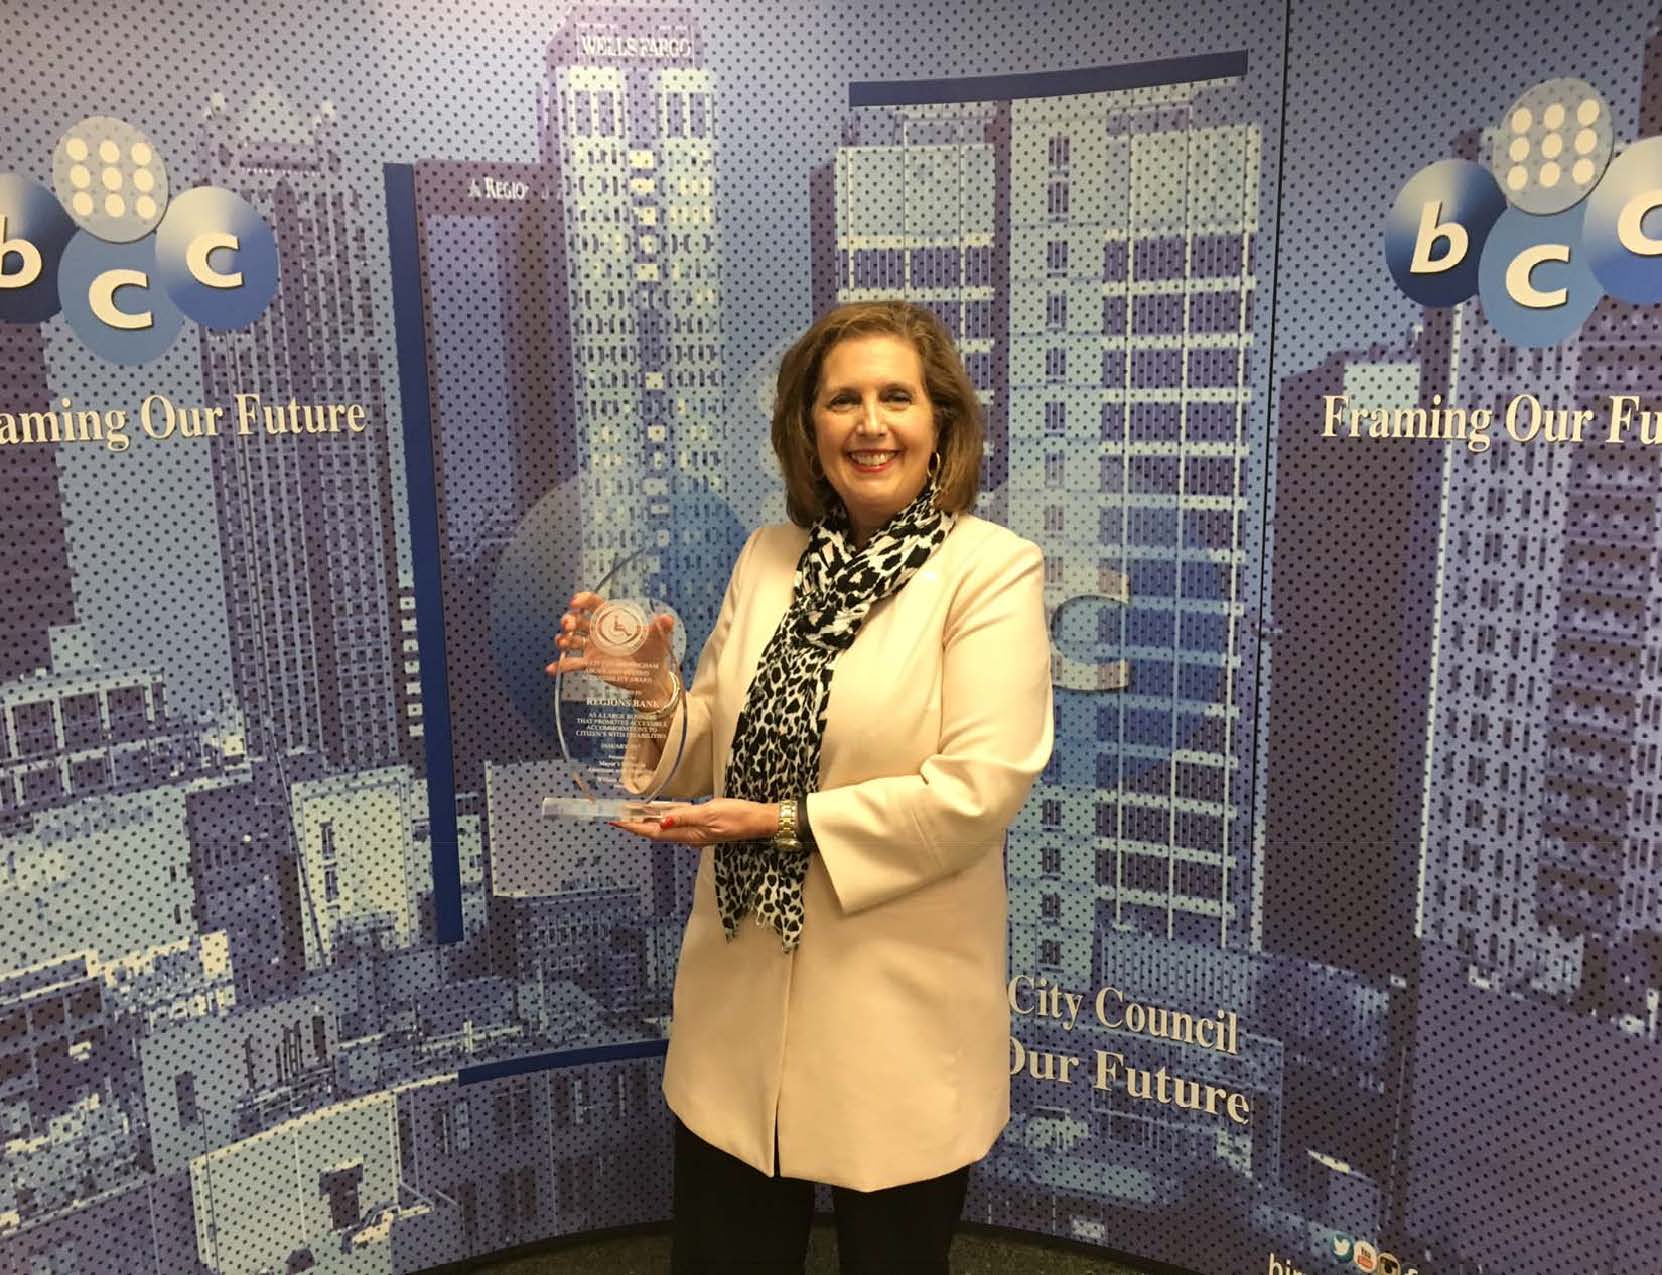 Kathy Lovell accepts the Above and Beyond Award for Regions